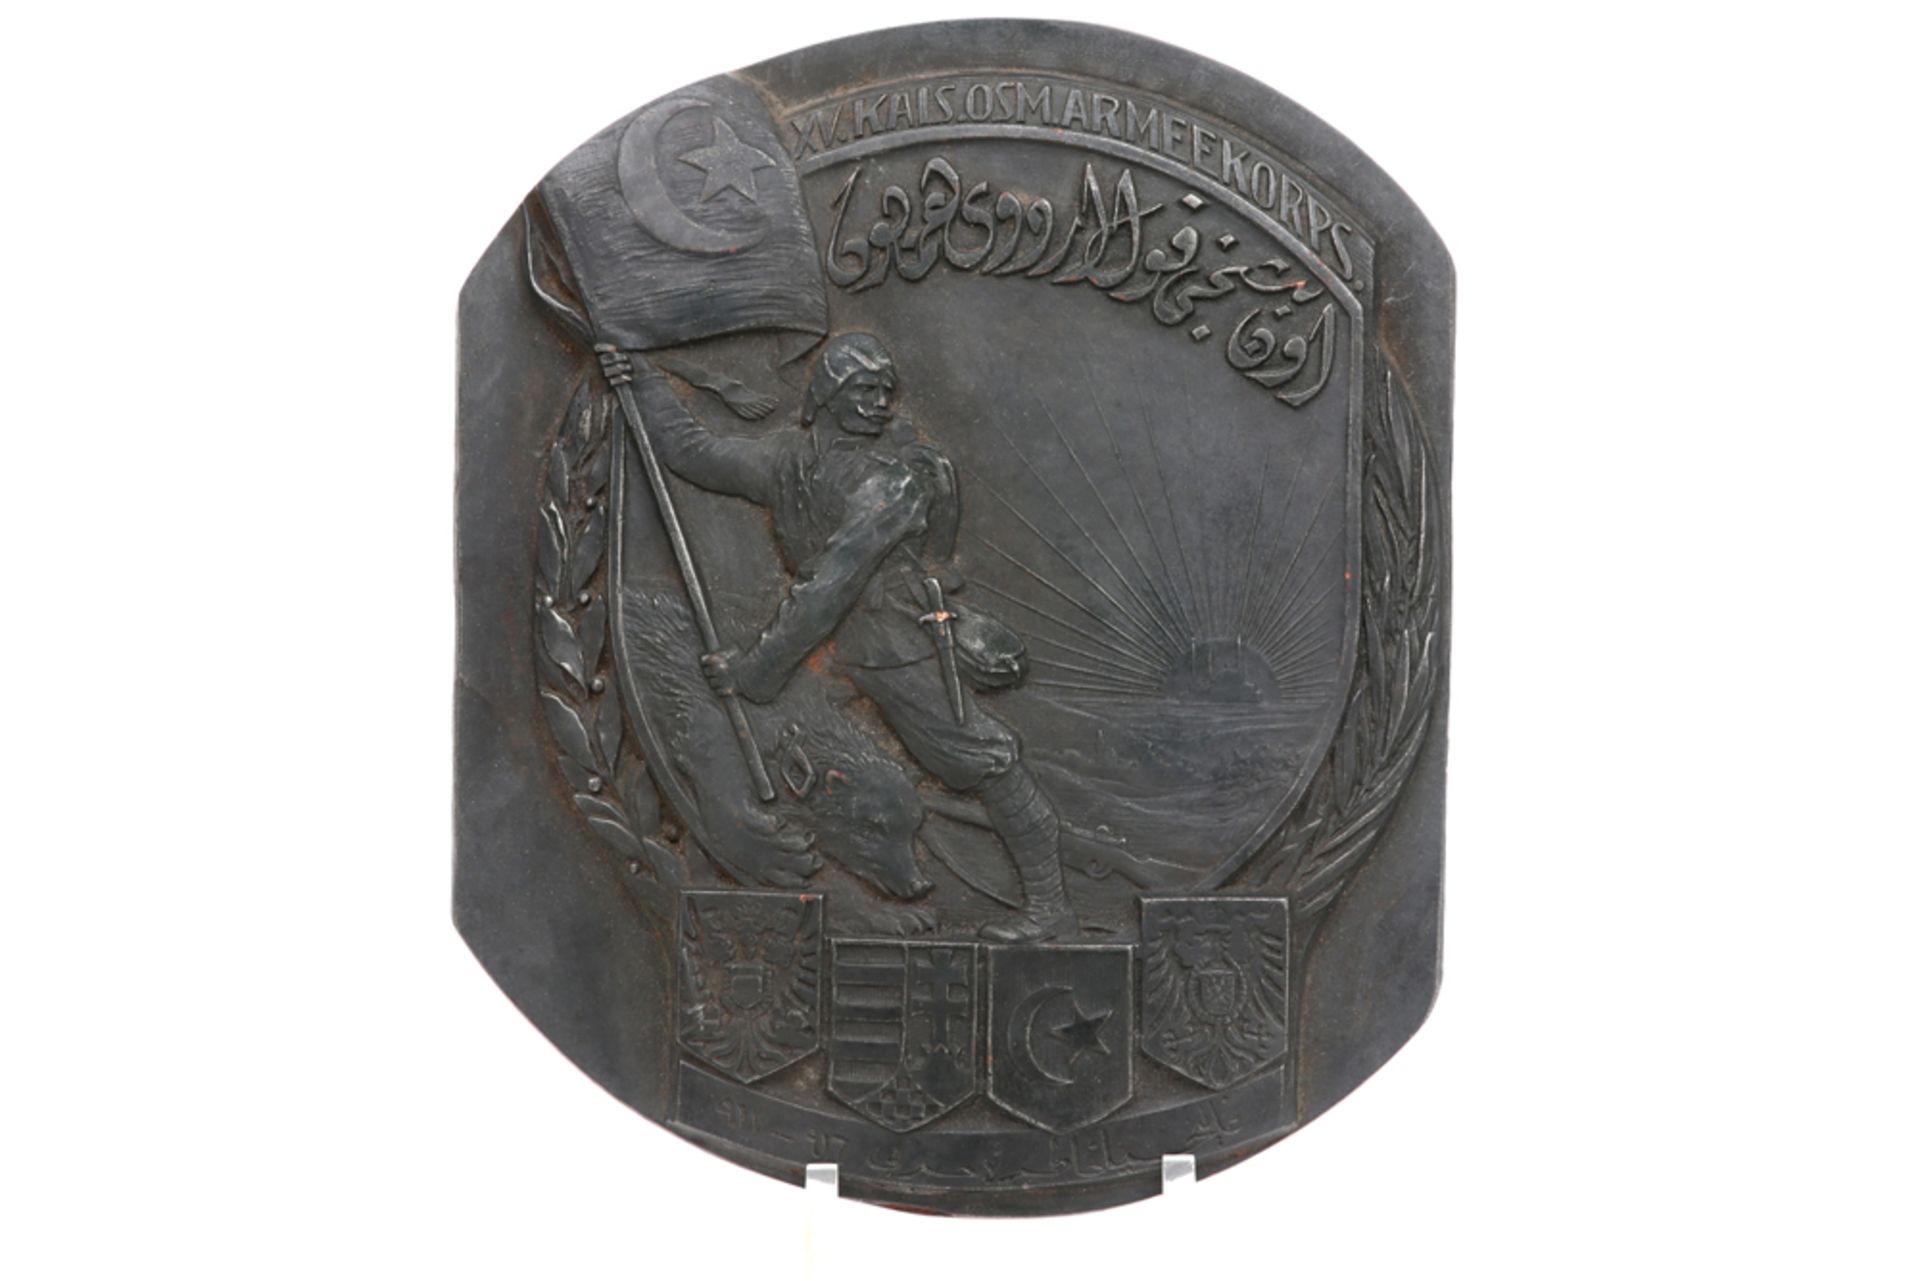 bronze plaque concerning World War 1 with the depiction of a Turkish warrior with bear and flag